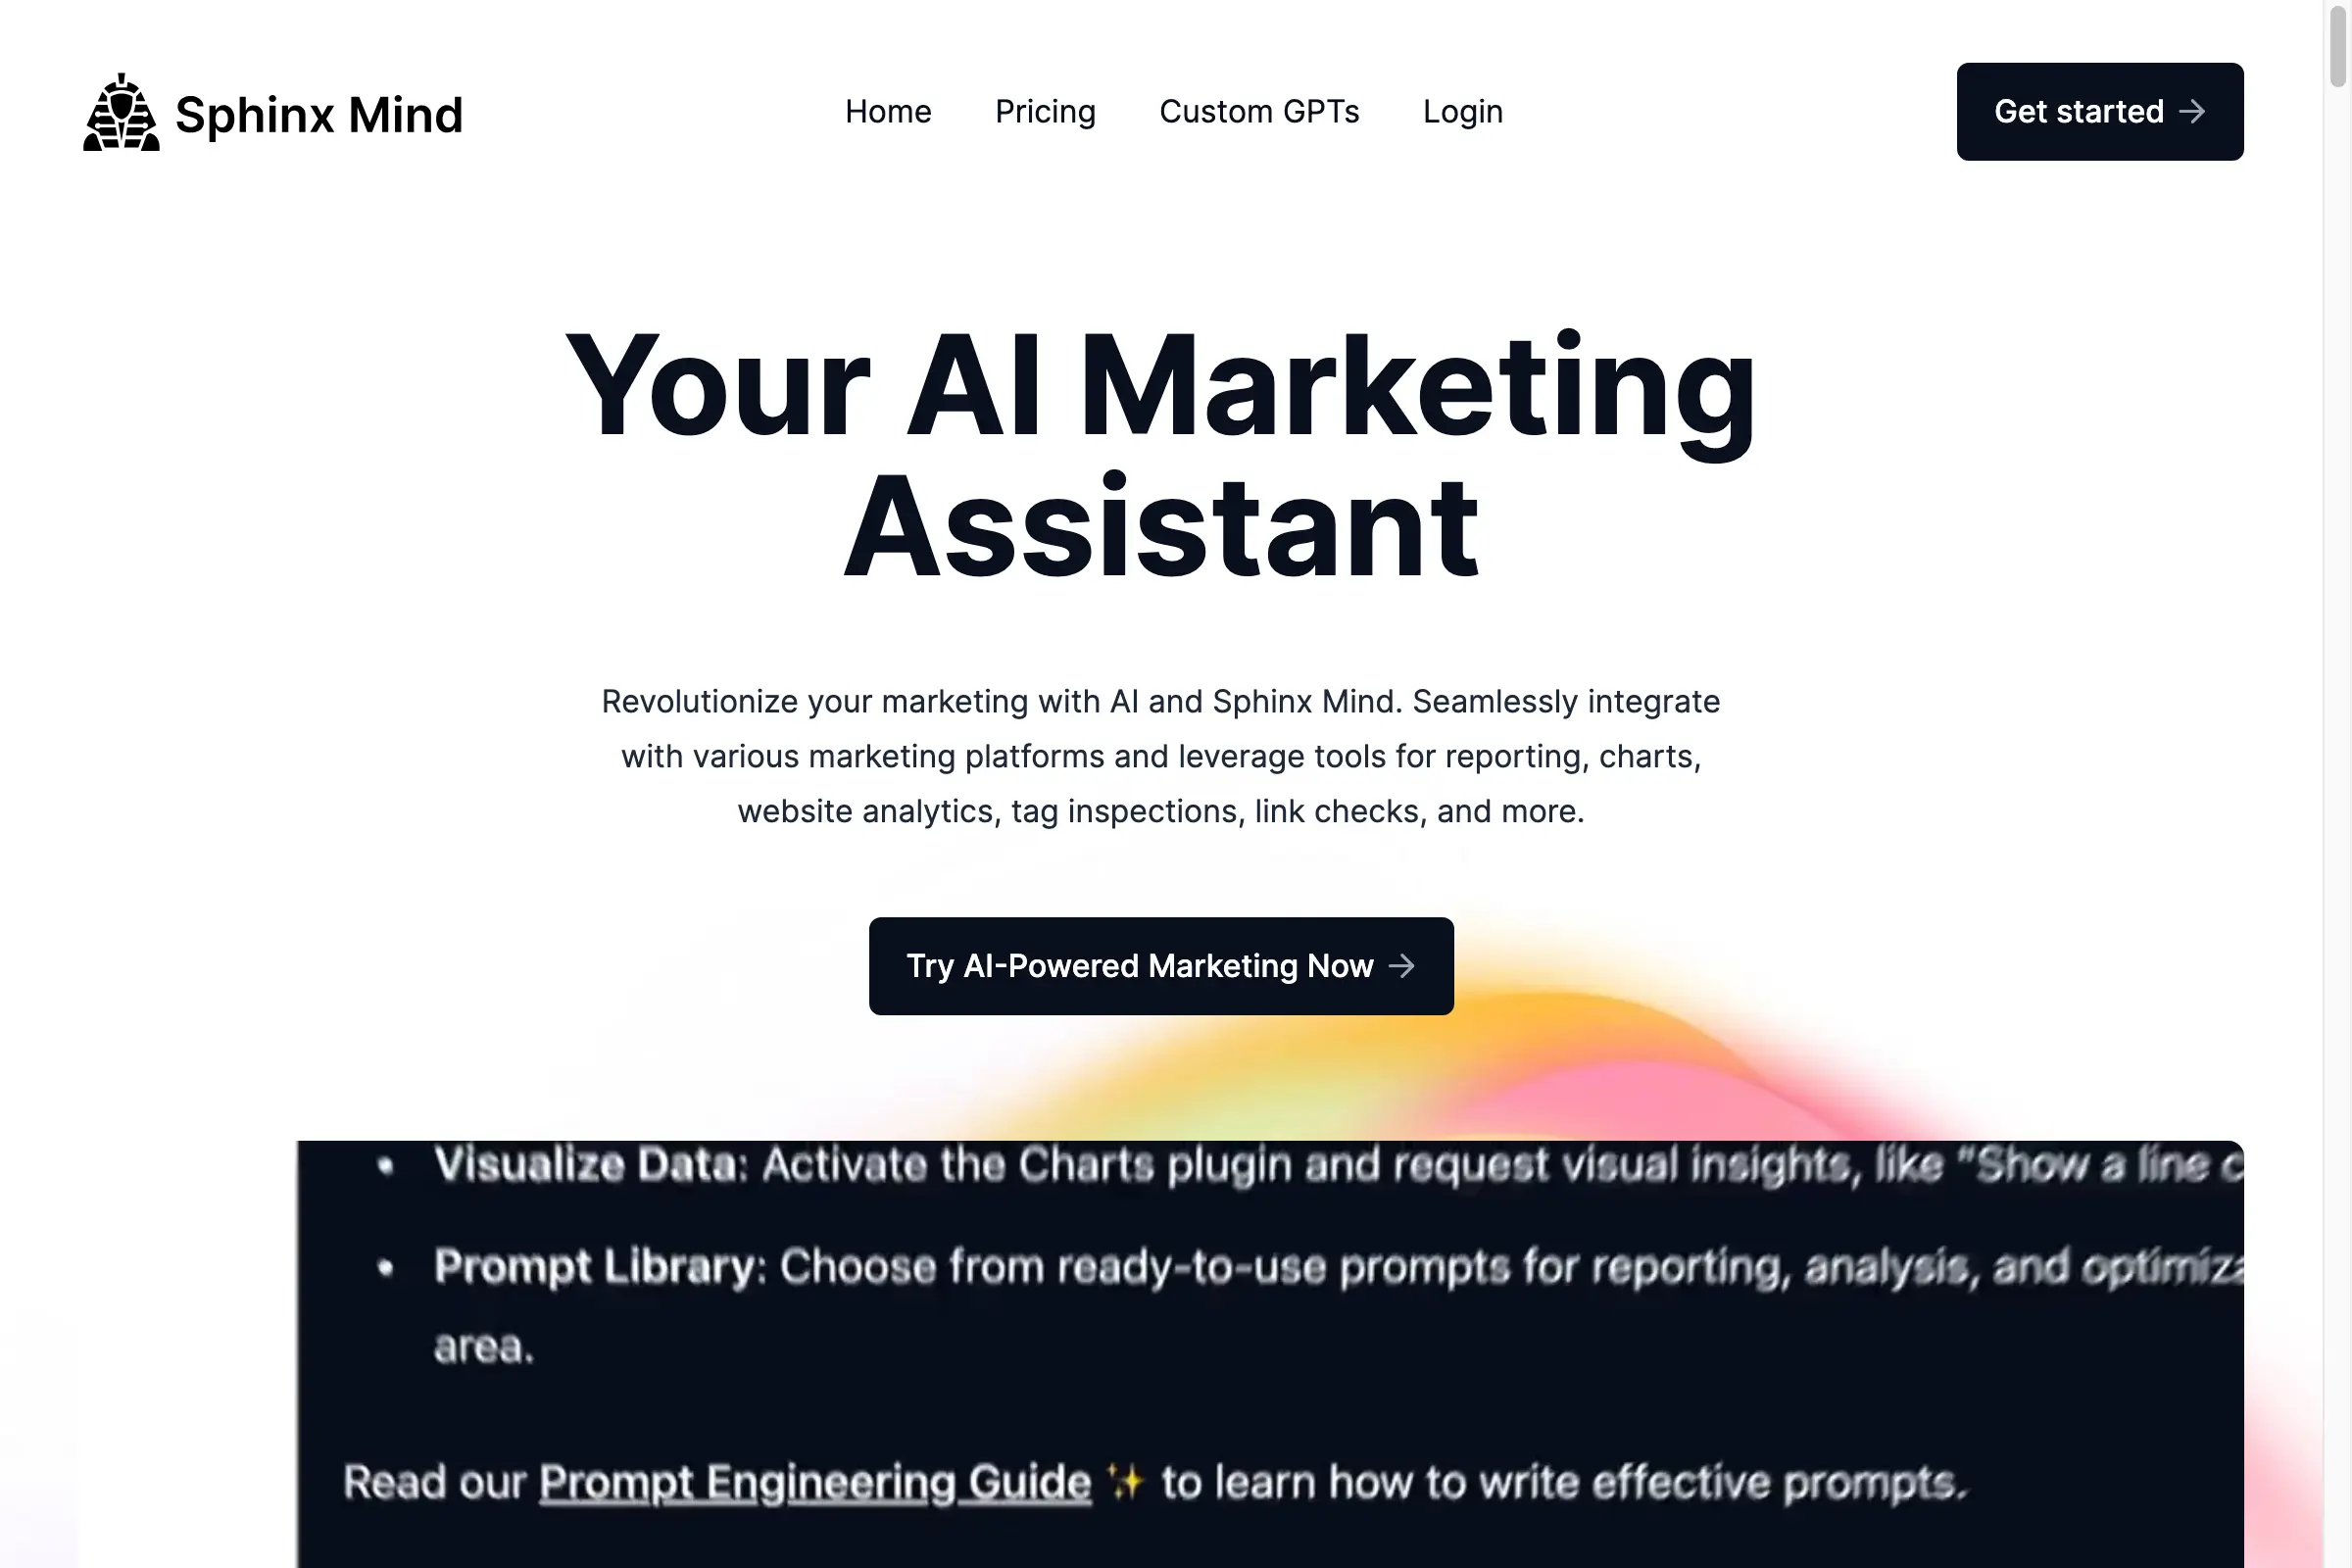 Sphinx Mind - Your AI Marketing Assistant